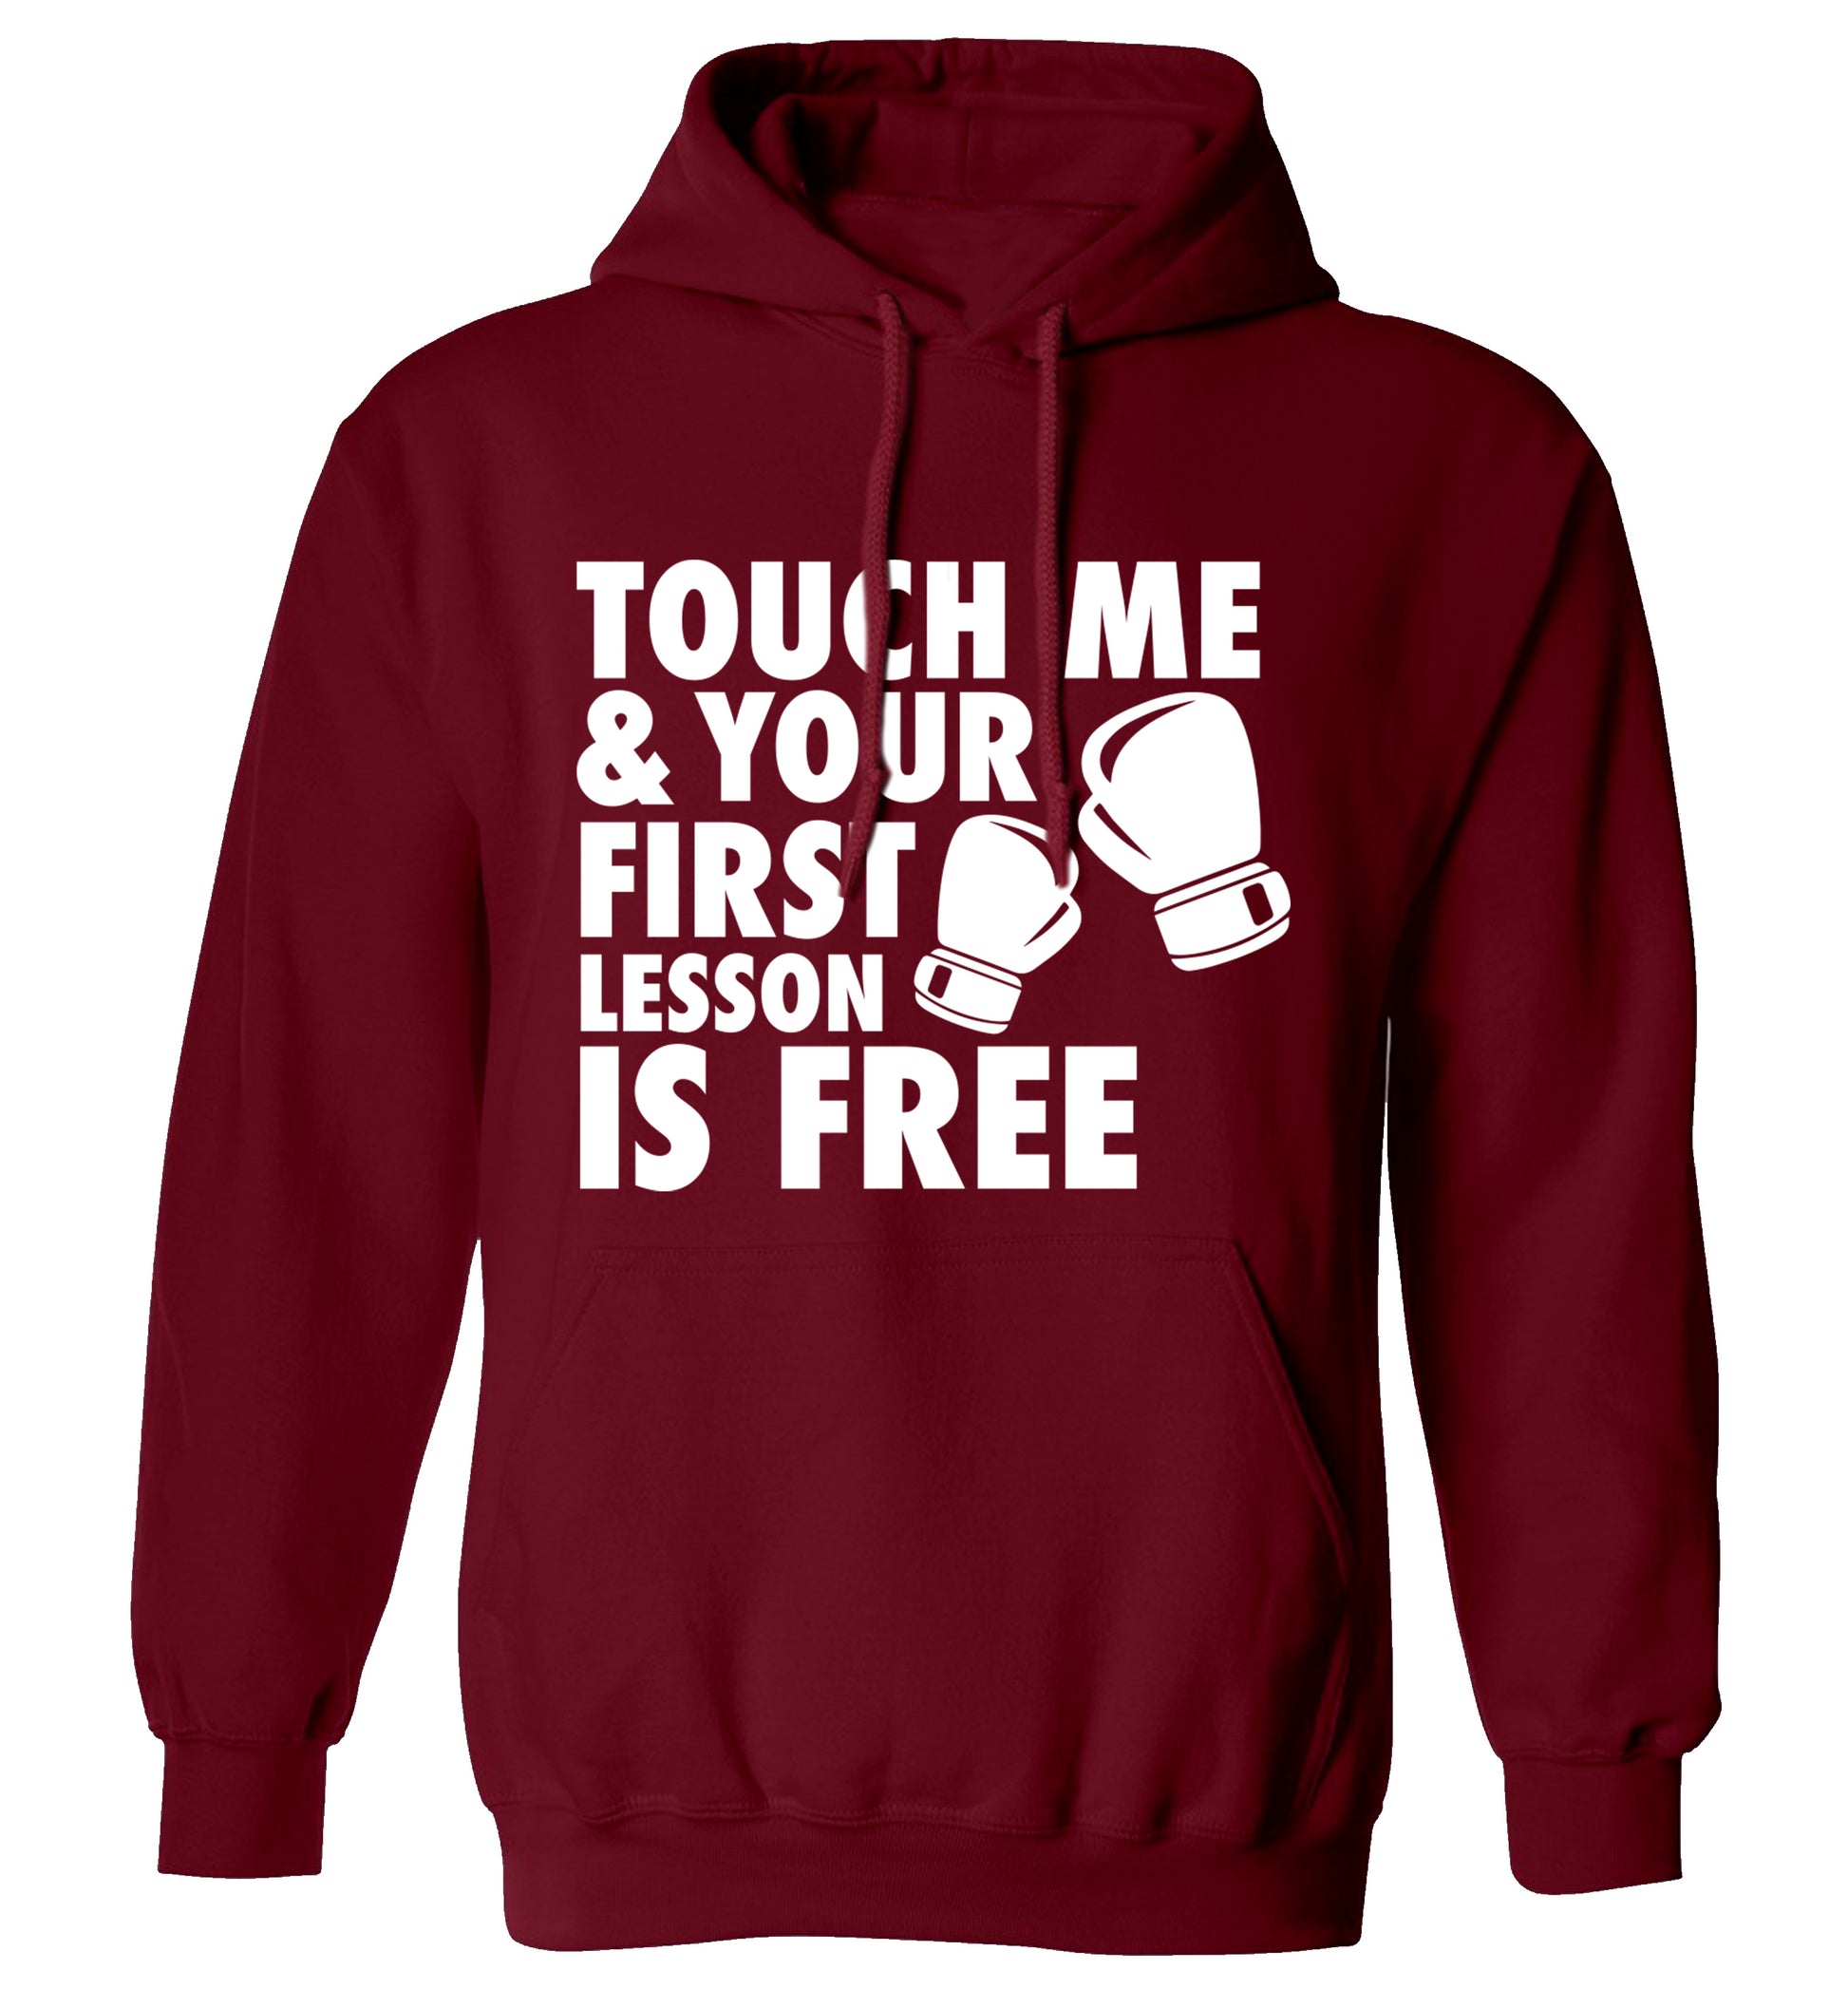 Touch me and your First Lesson is Free  adults unisex maroon hoodie 2XL